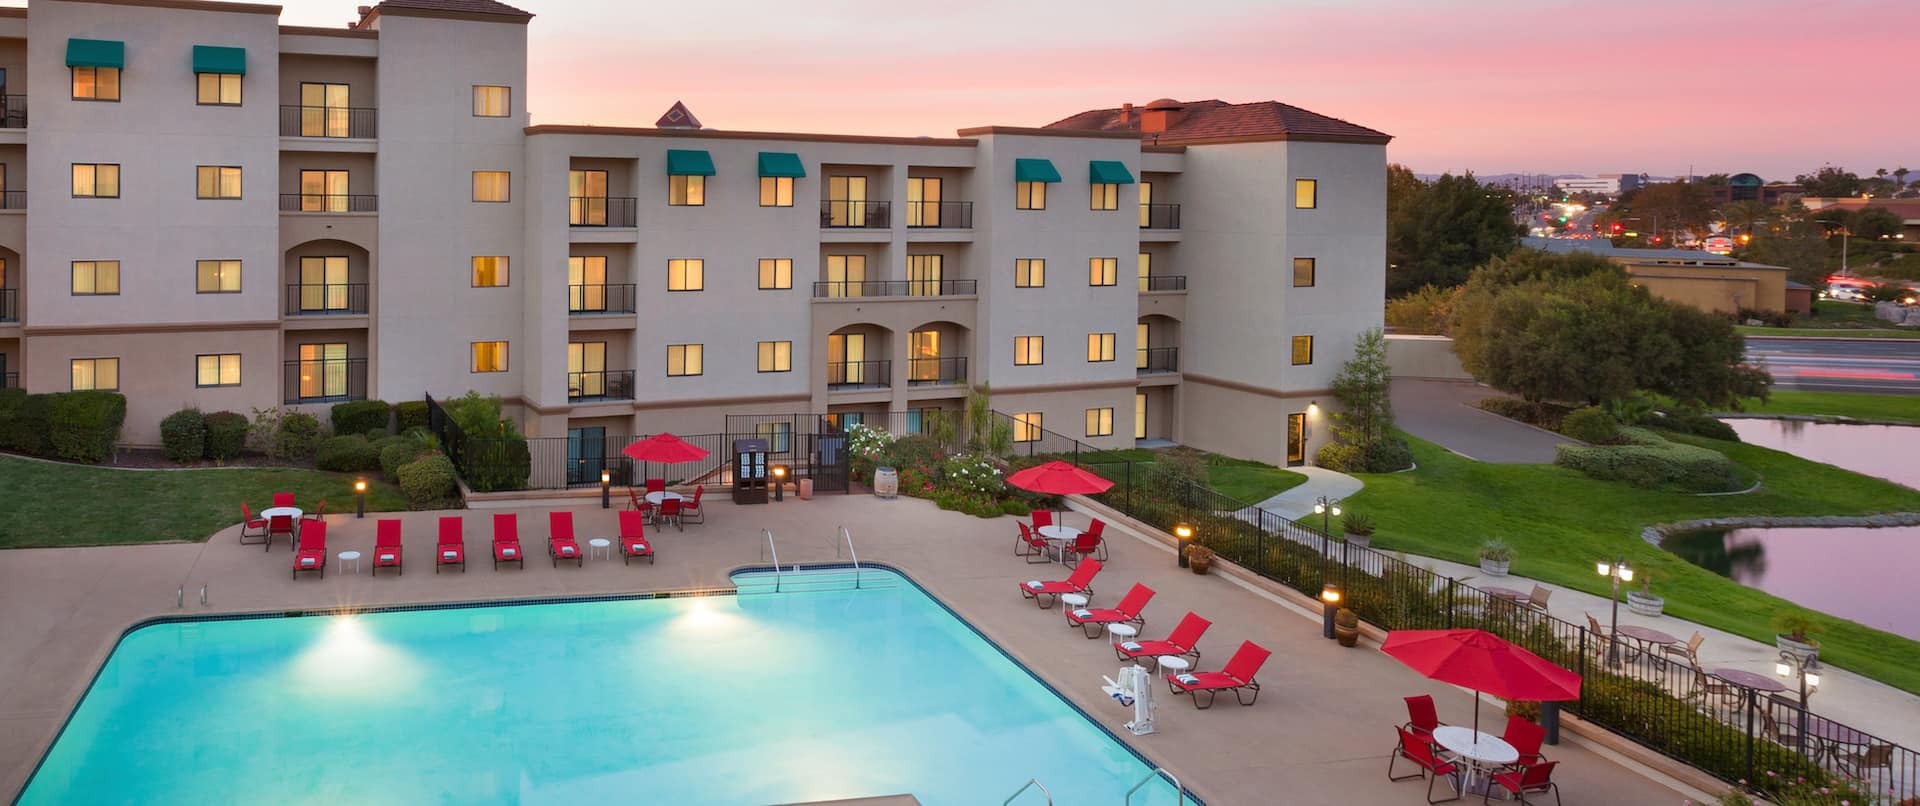 Photo of Embassy Suites Temecula Valley Wine Country, Temecula, CA